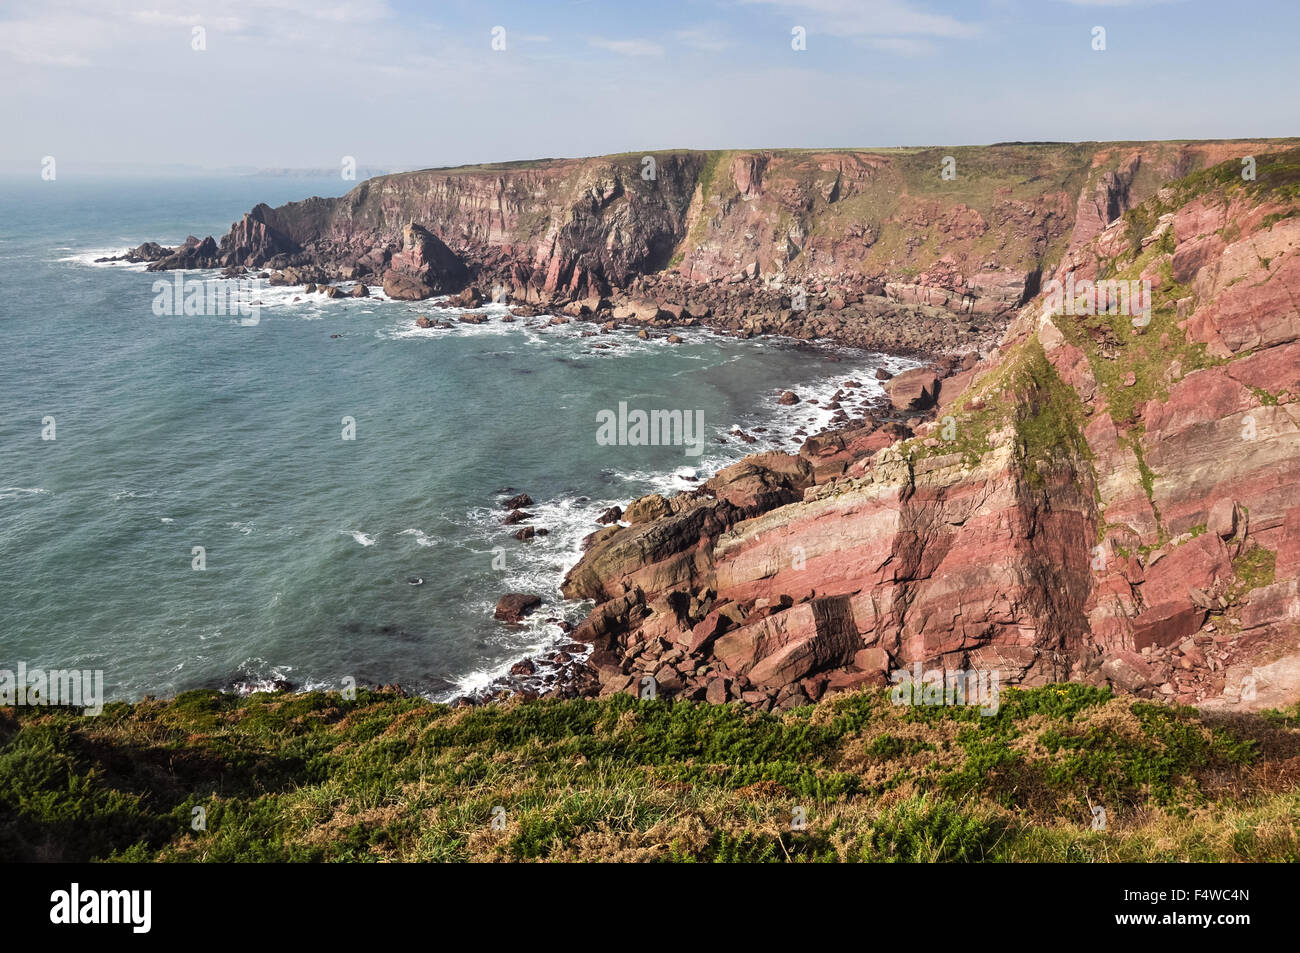 Dramatic geology at St Annes Head, Pembrokeshire, Wales. Stock Photo